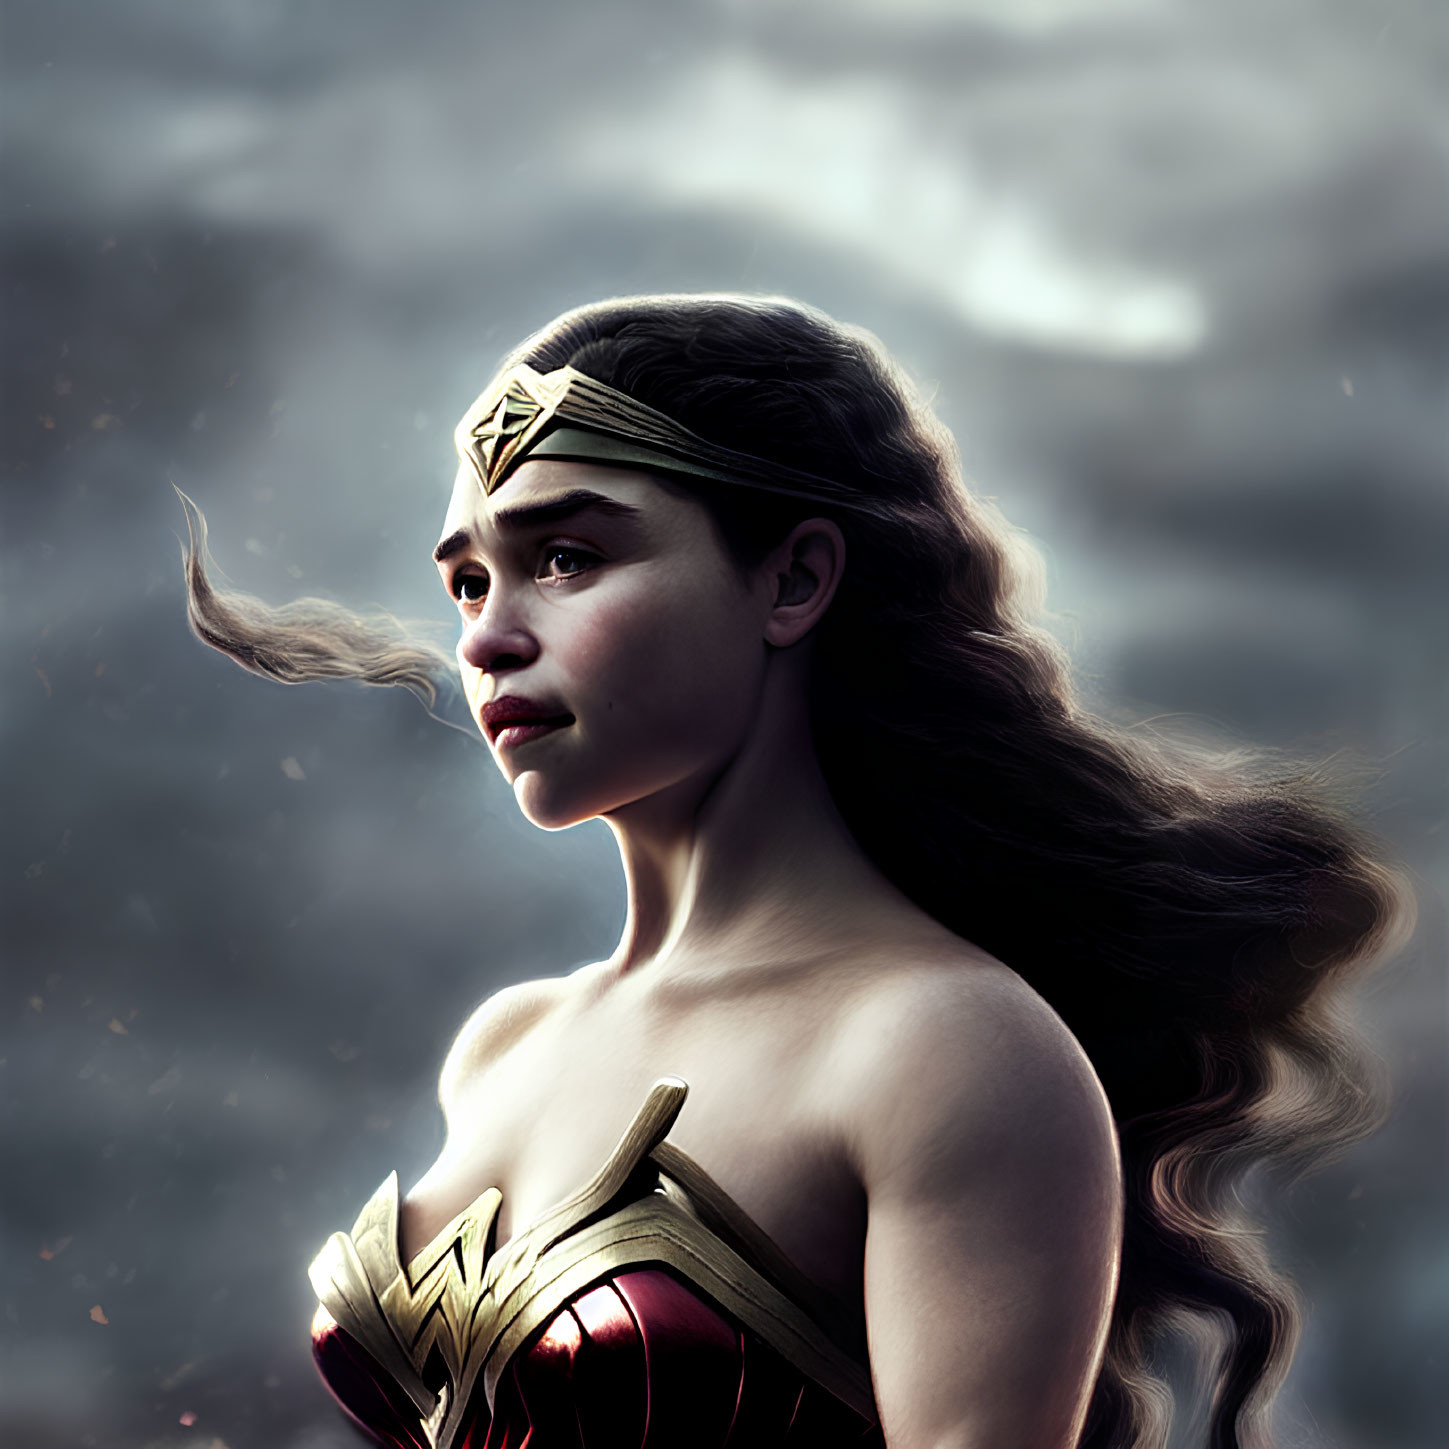 Female superhero with golden tiara and flowing hair against dramatic sky